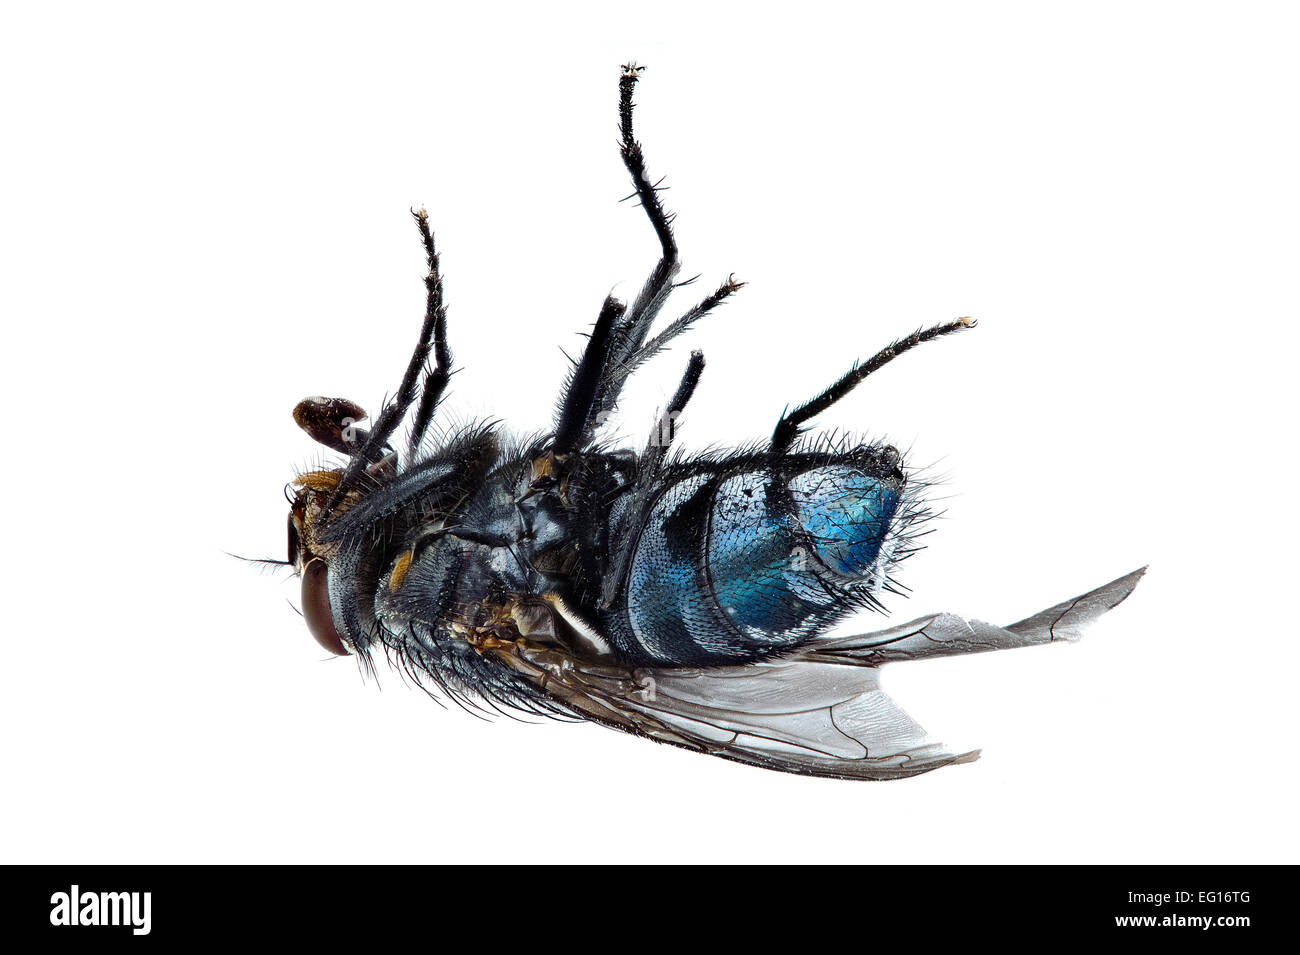 focus stacked image of dead fly on its back bluebottle Calliphora vomitoria all of insect is in focus Stock Photo